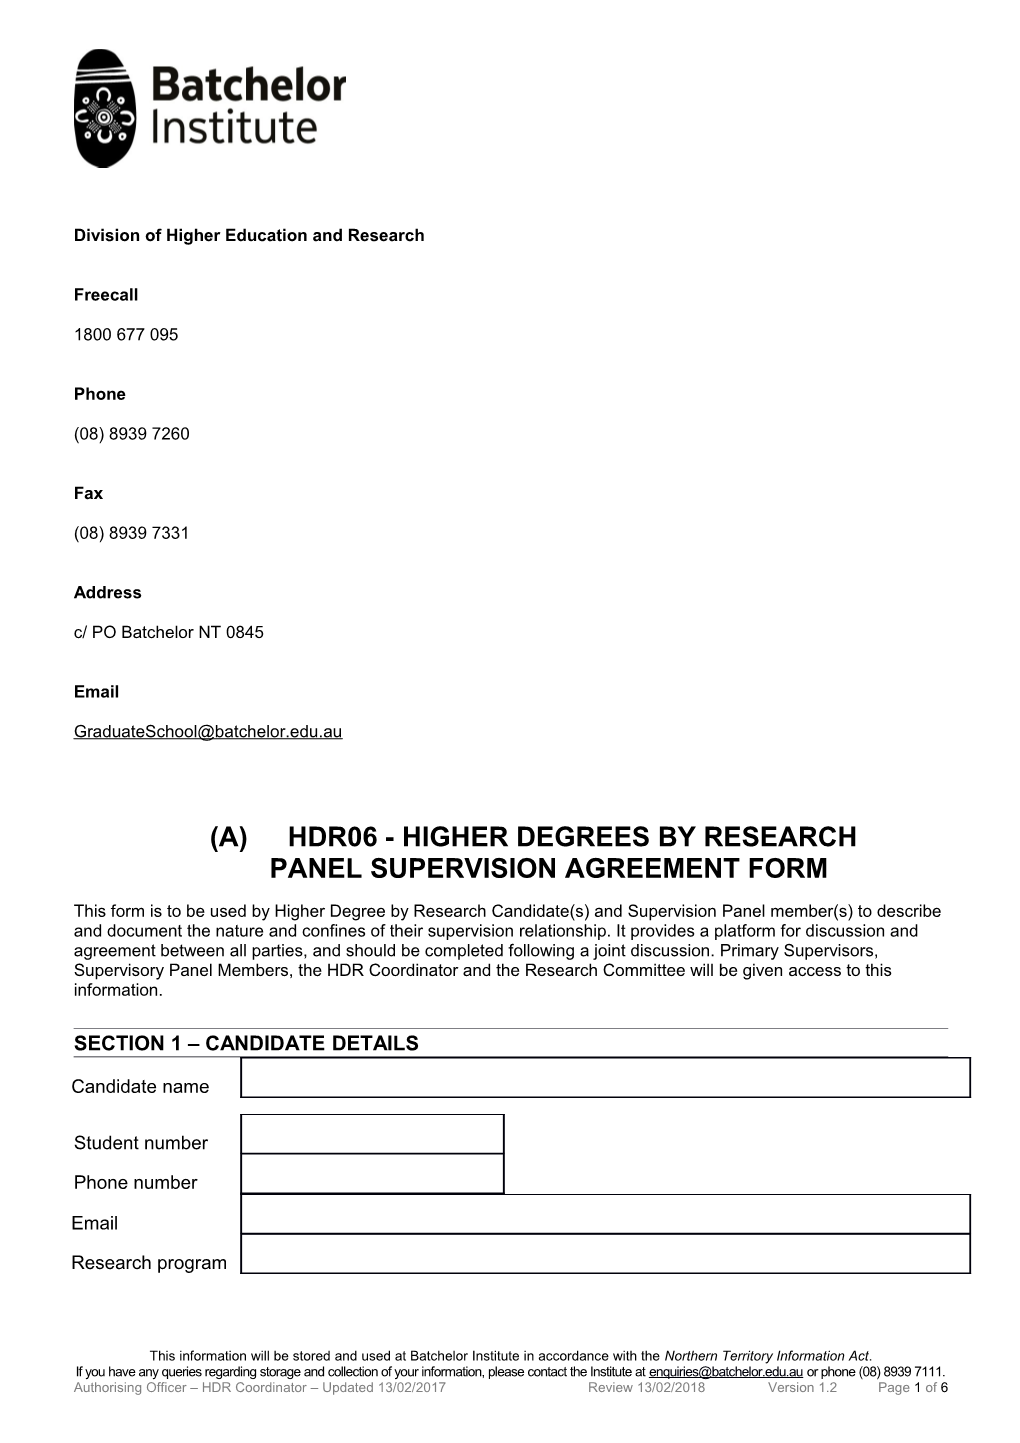 HDR06 - HIGHER DEGREES by RESEARCHPANEL Supervision AGREEMENT FORM